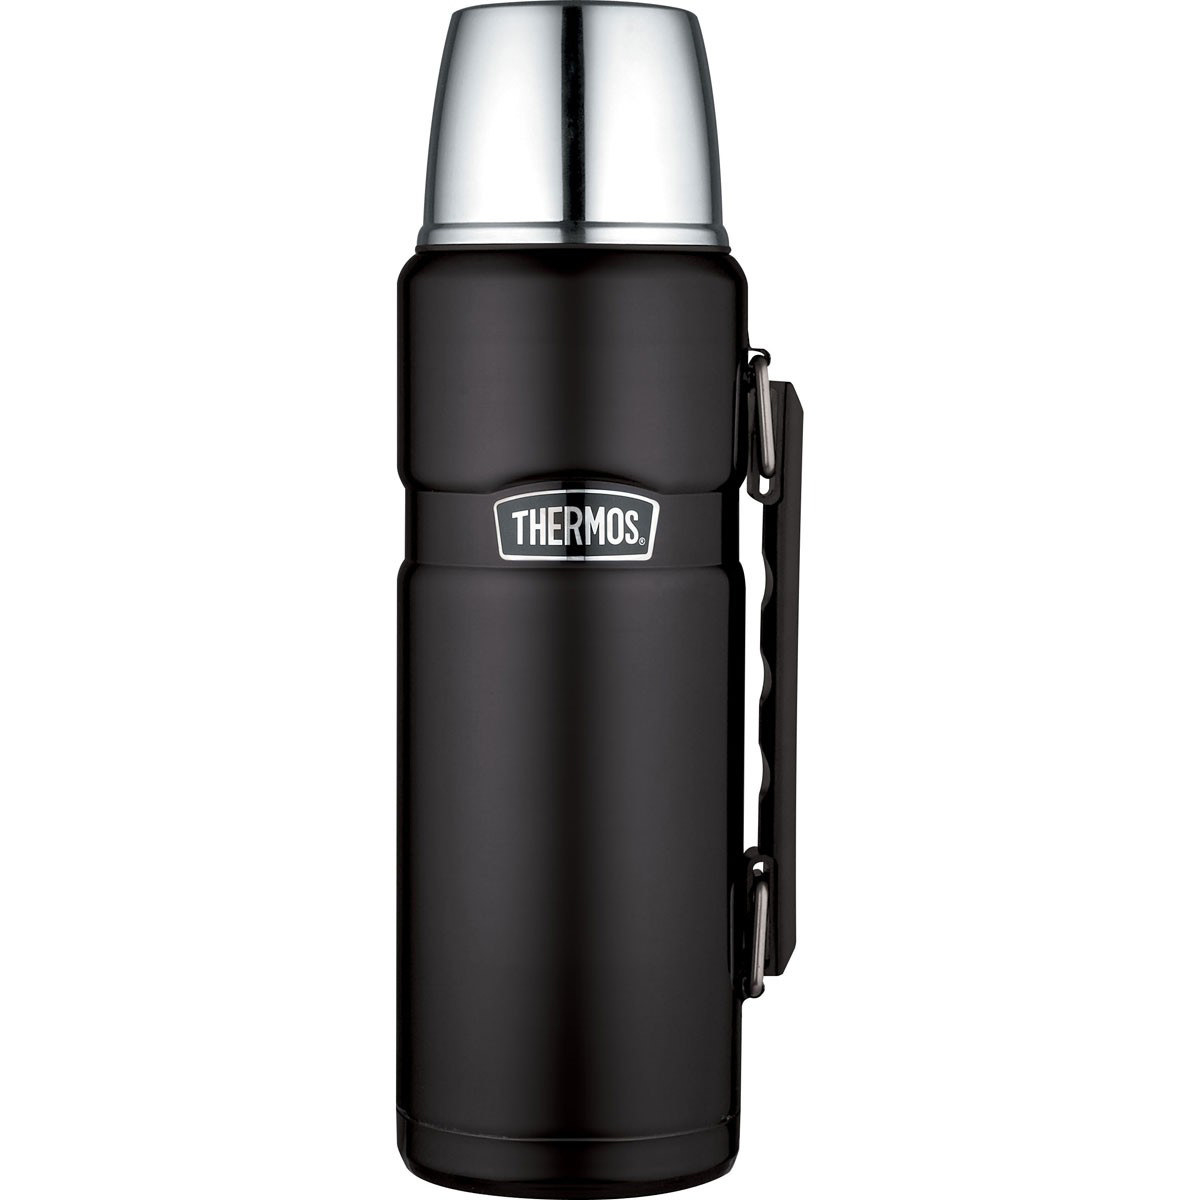 A black thermos with a silver top